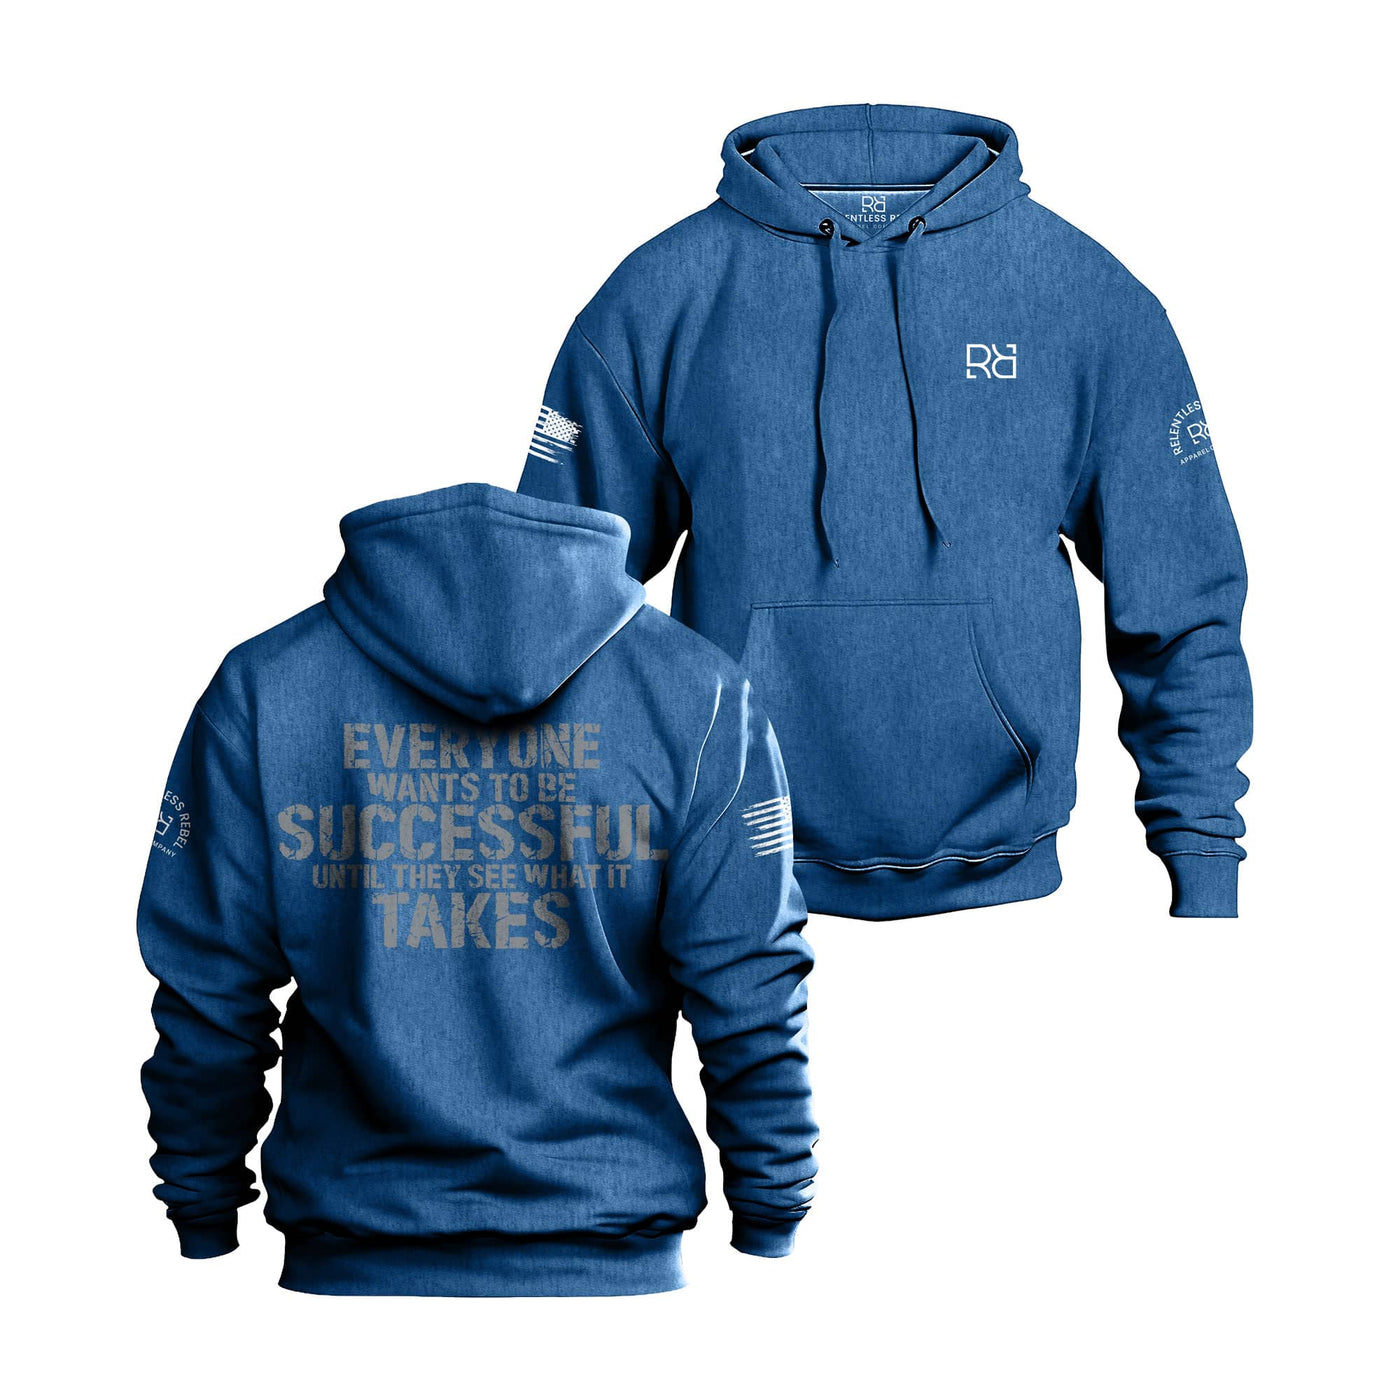 Royal Heather Men's Everyone Wants to Be Successful Back Design Hoodie